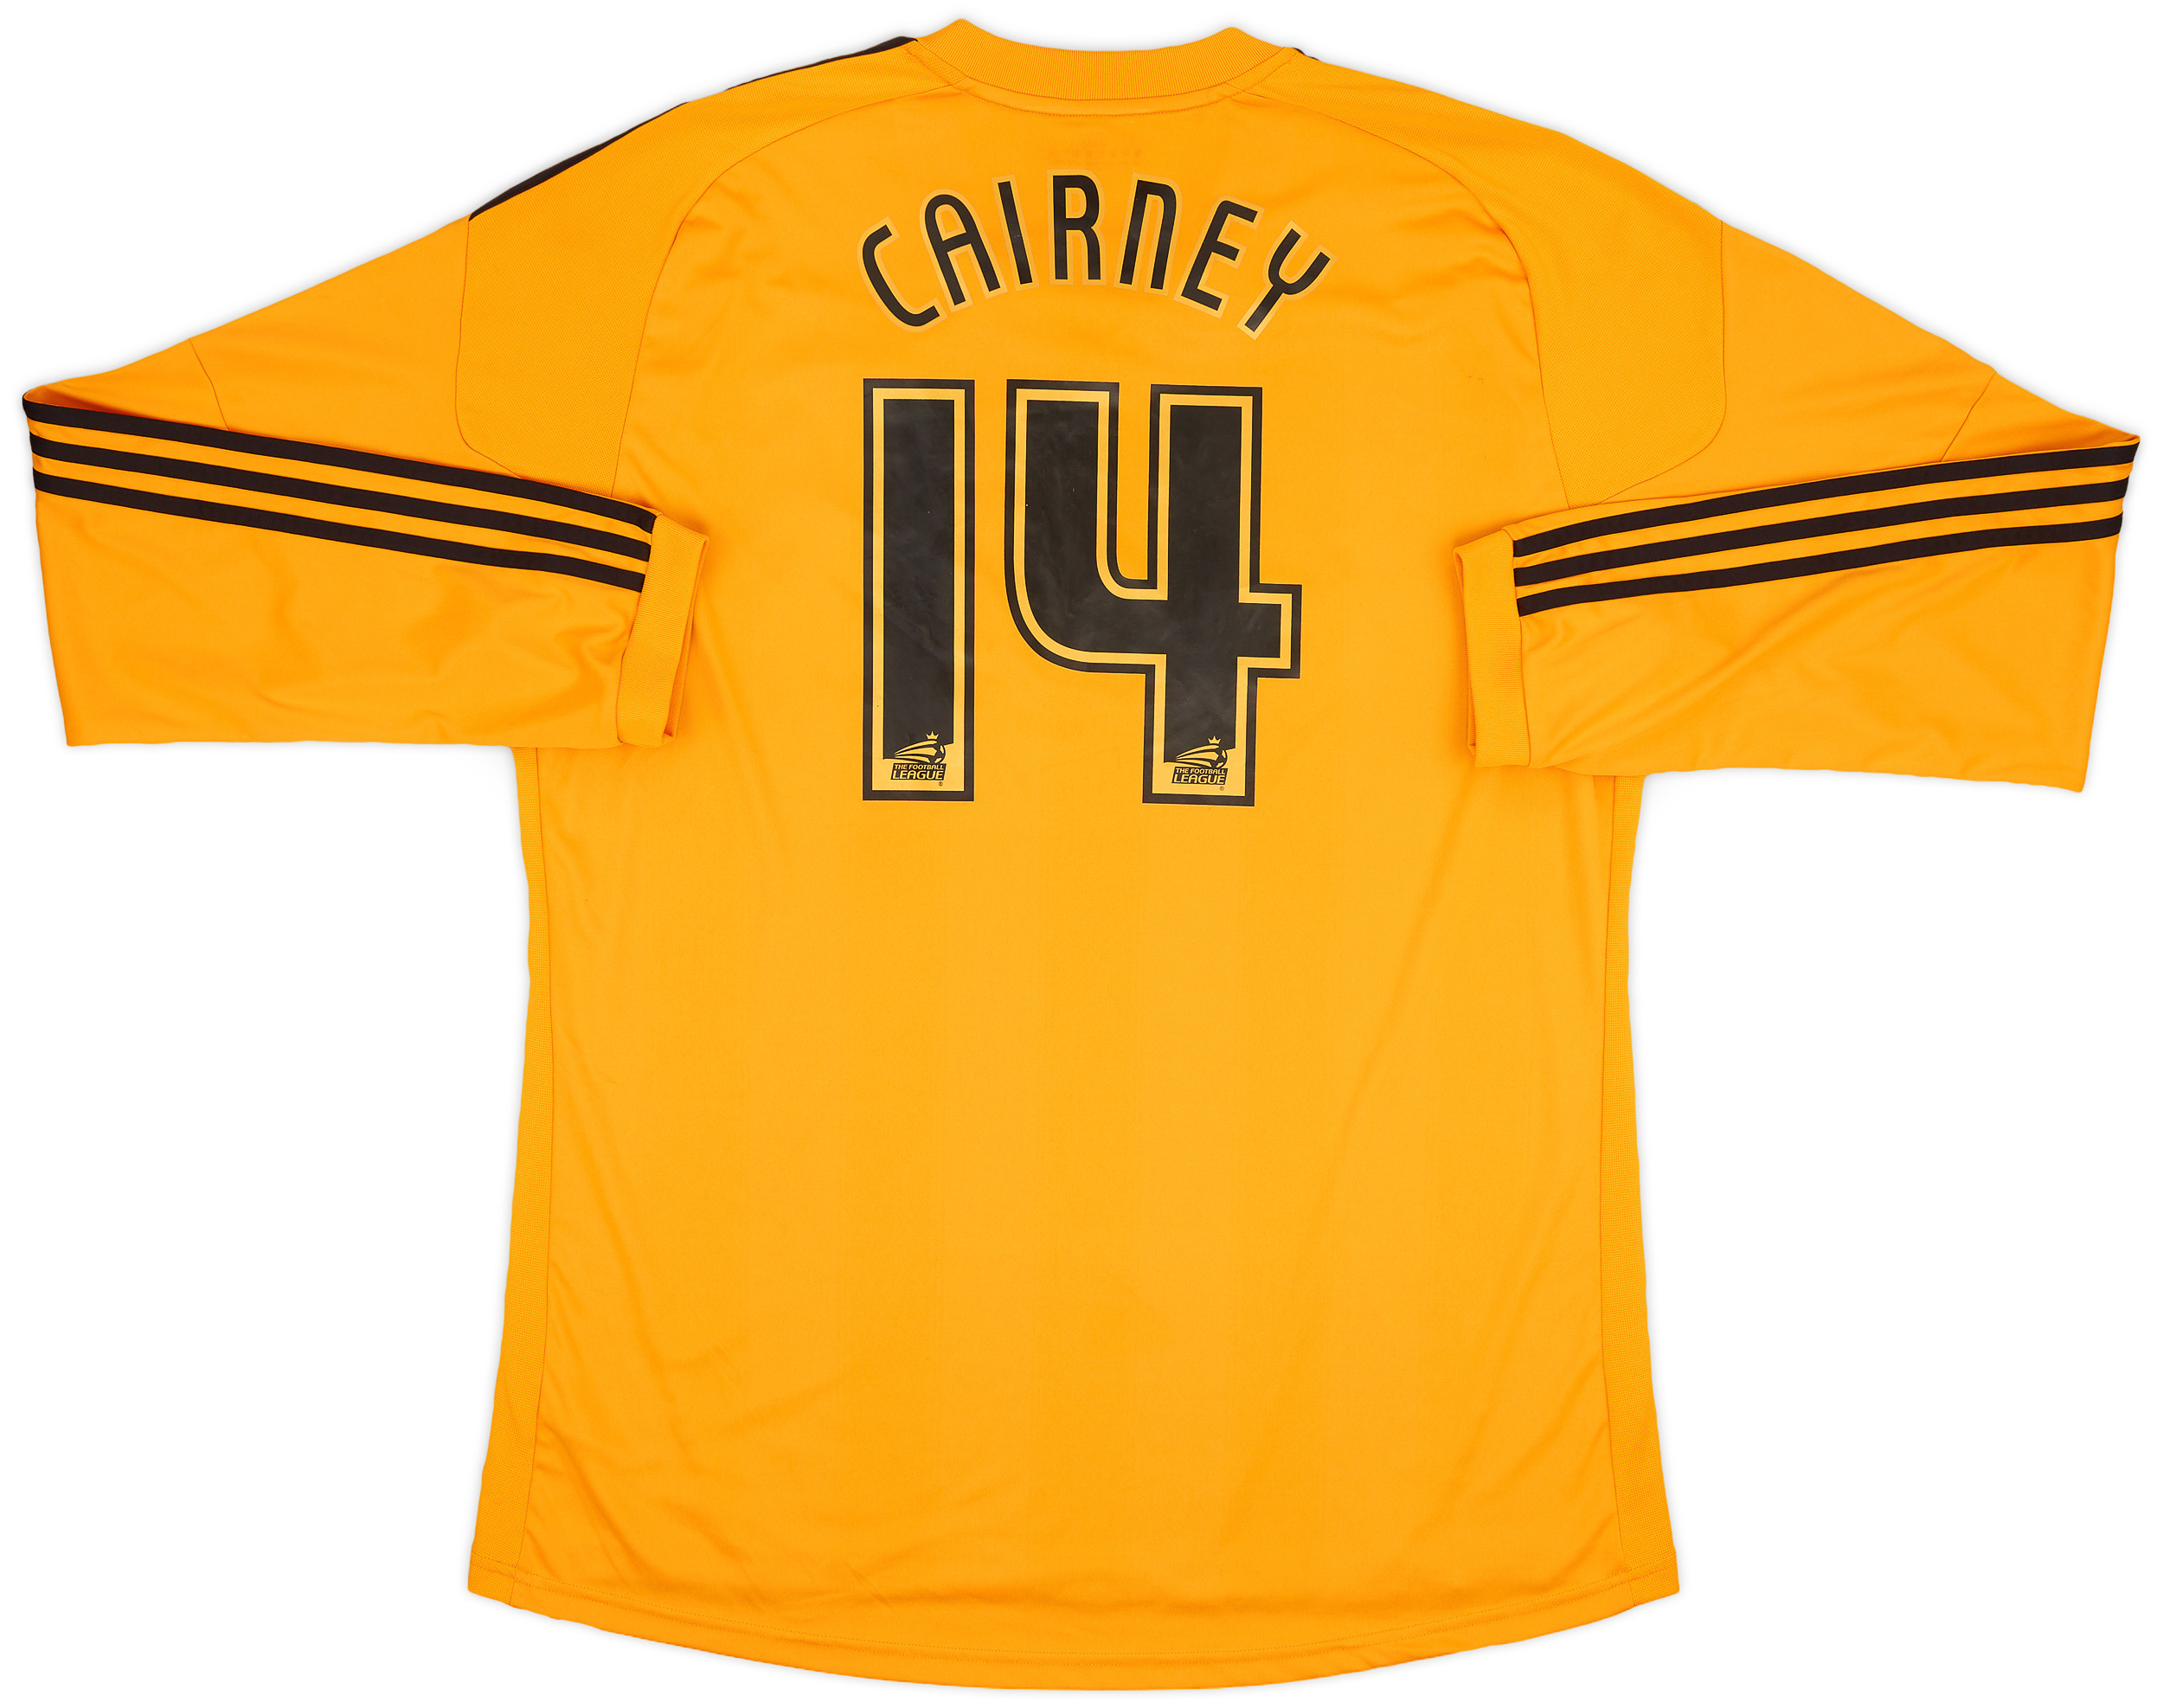 2010-11 Hull City Home Shirt Cairney #14 - 8/10 - ()